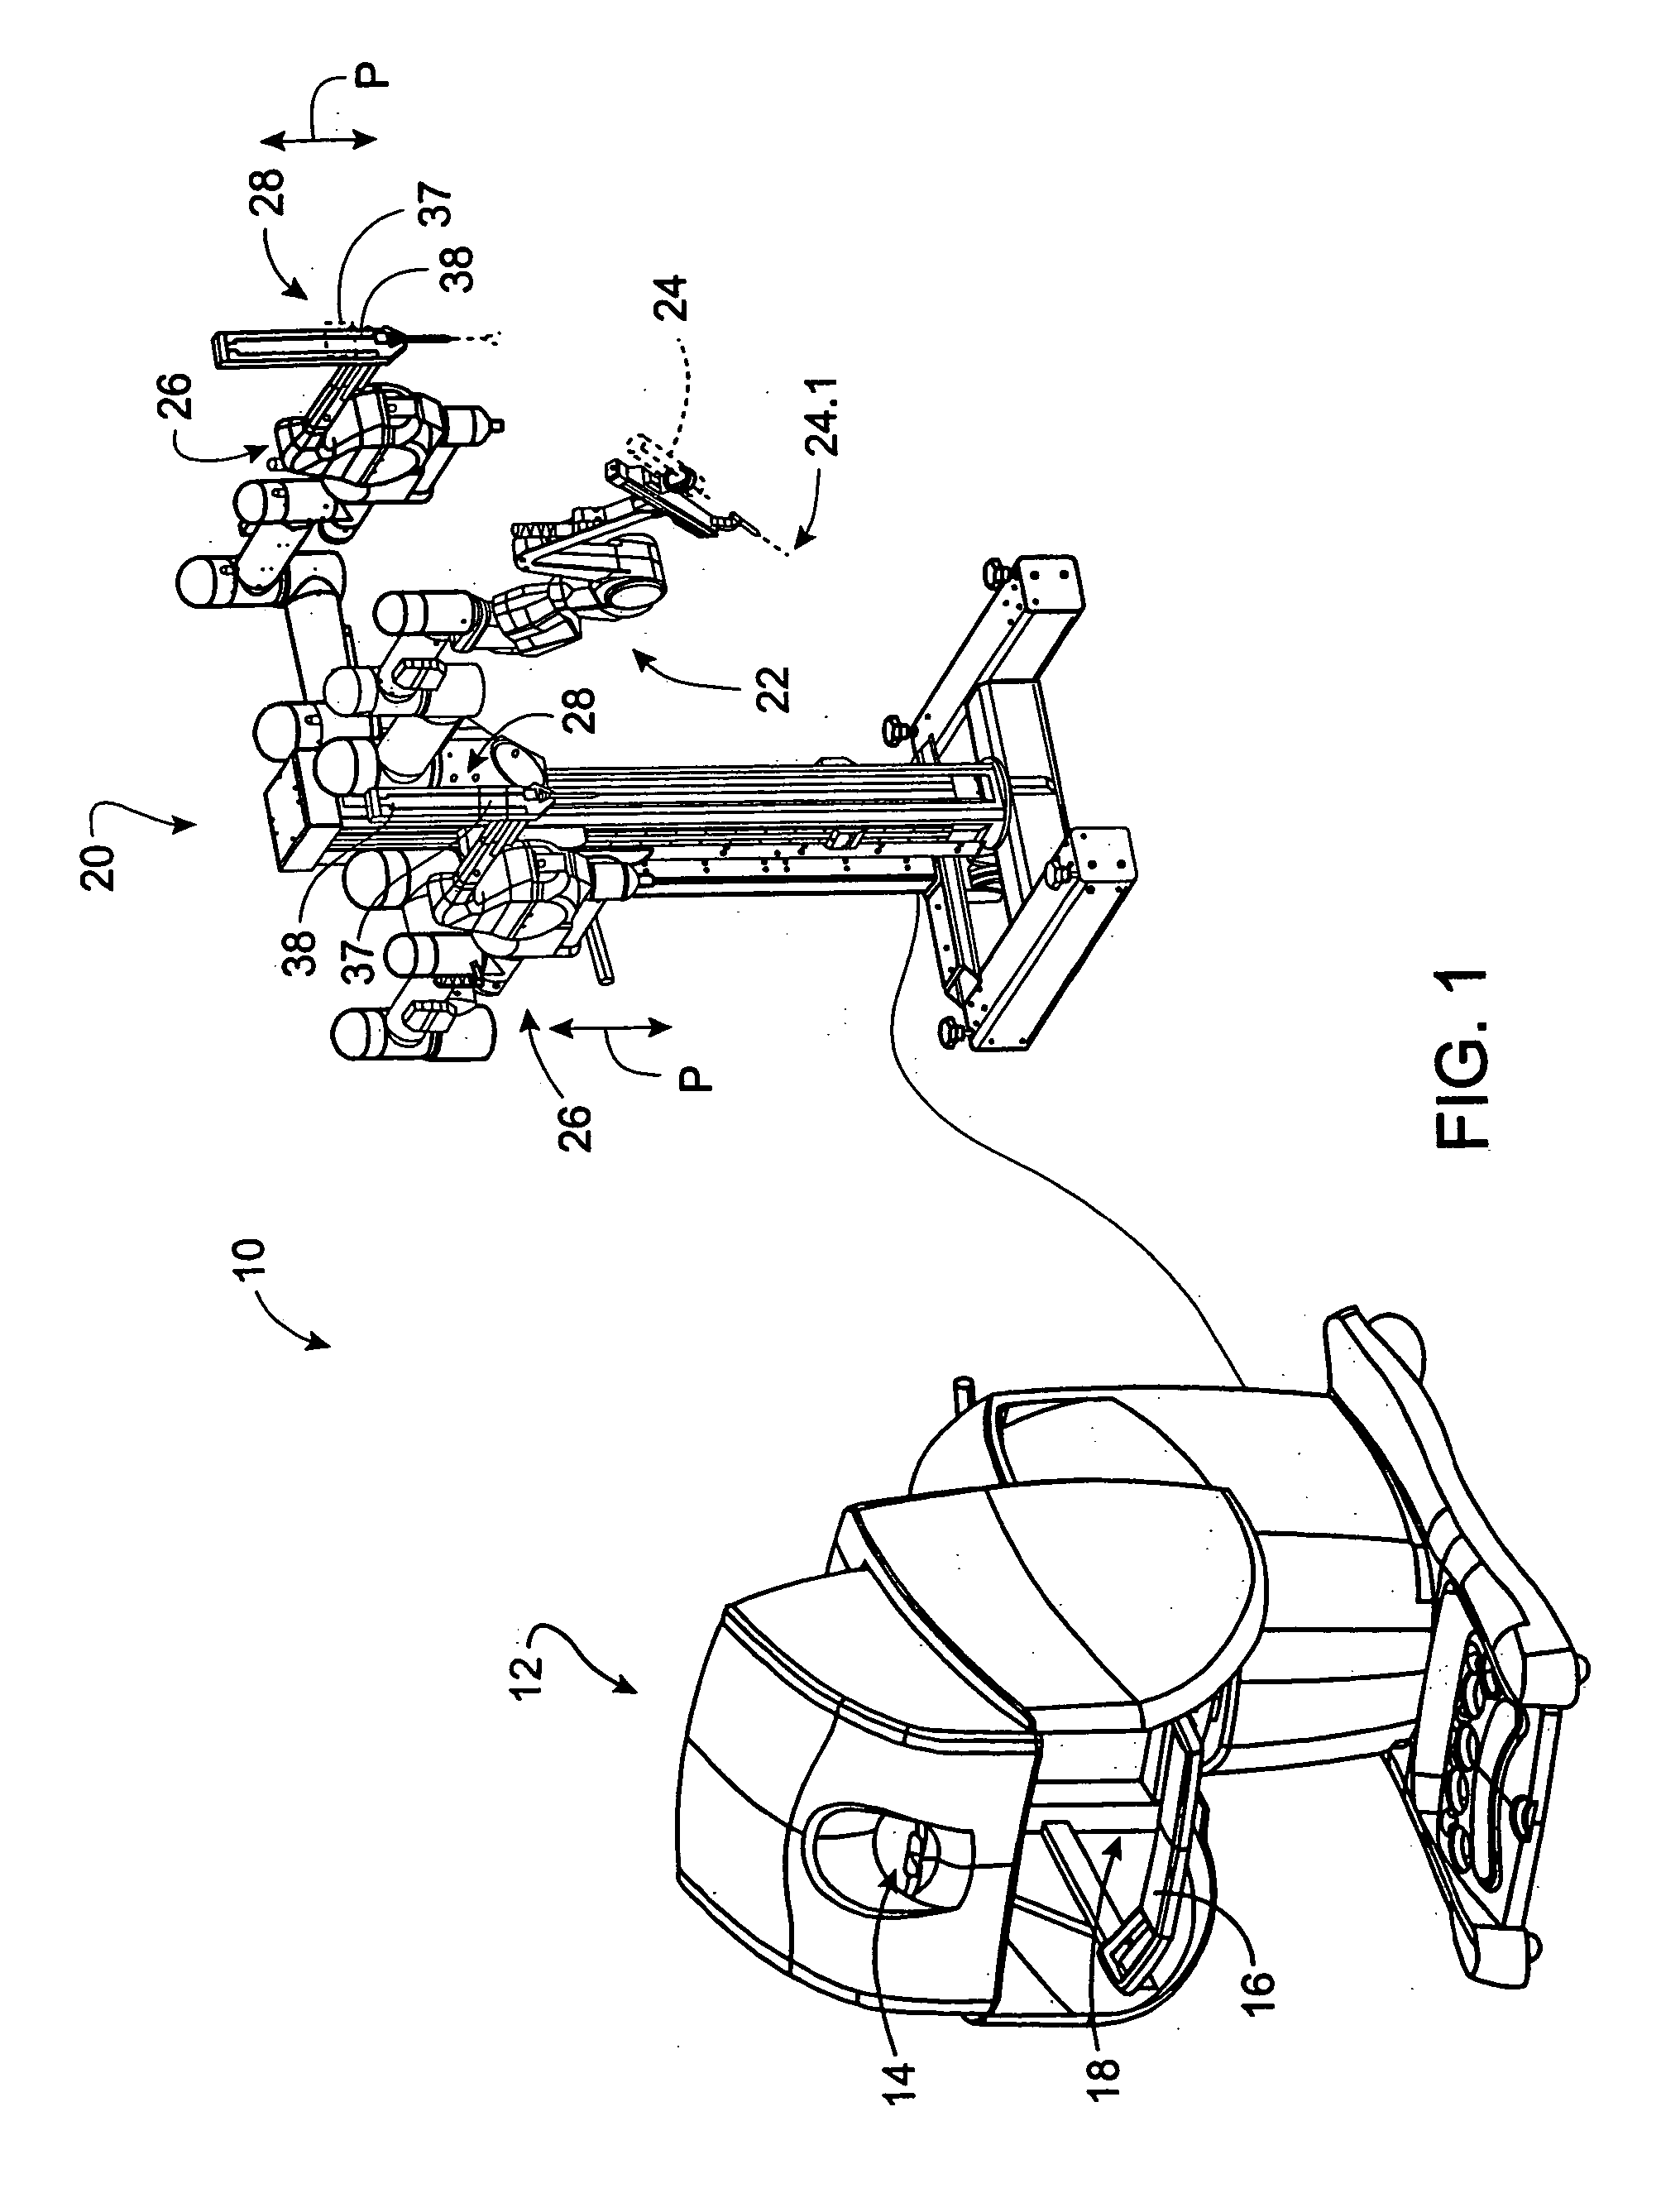 Robotic surgical tool with ultrasound cauterizing and cutting instrument